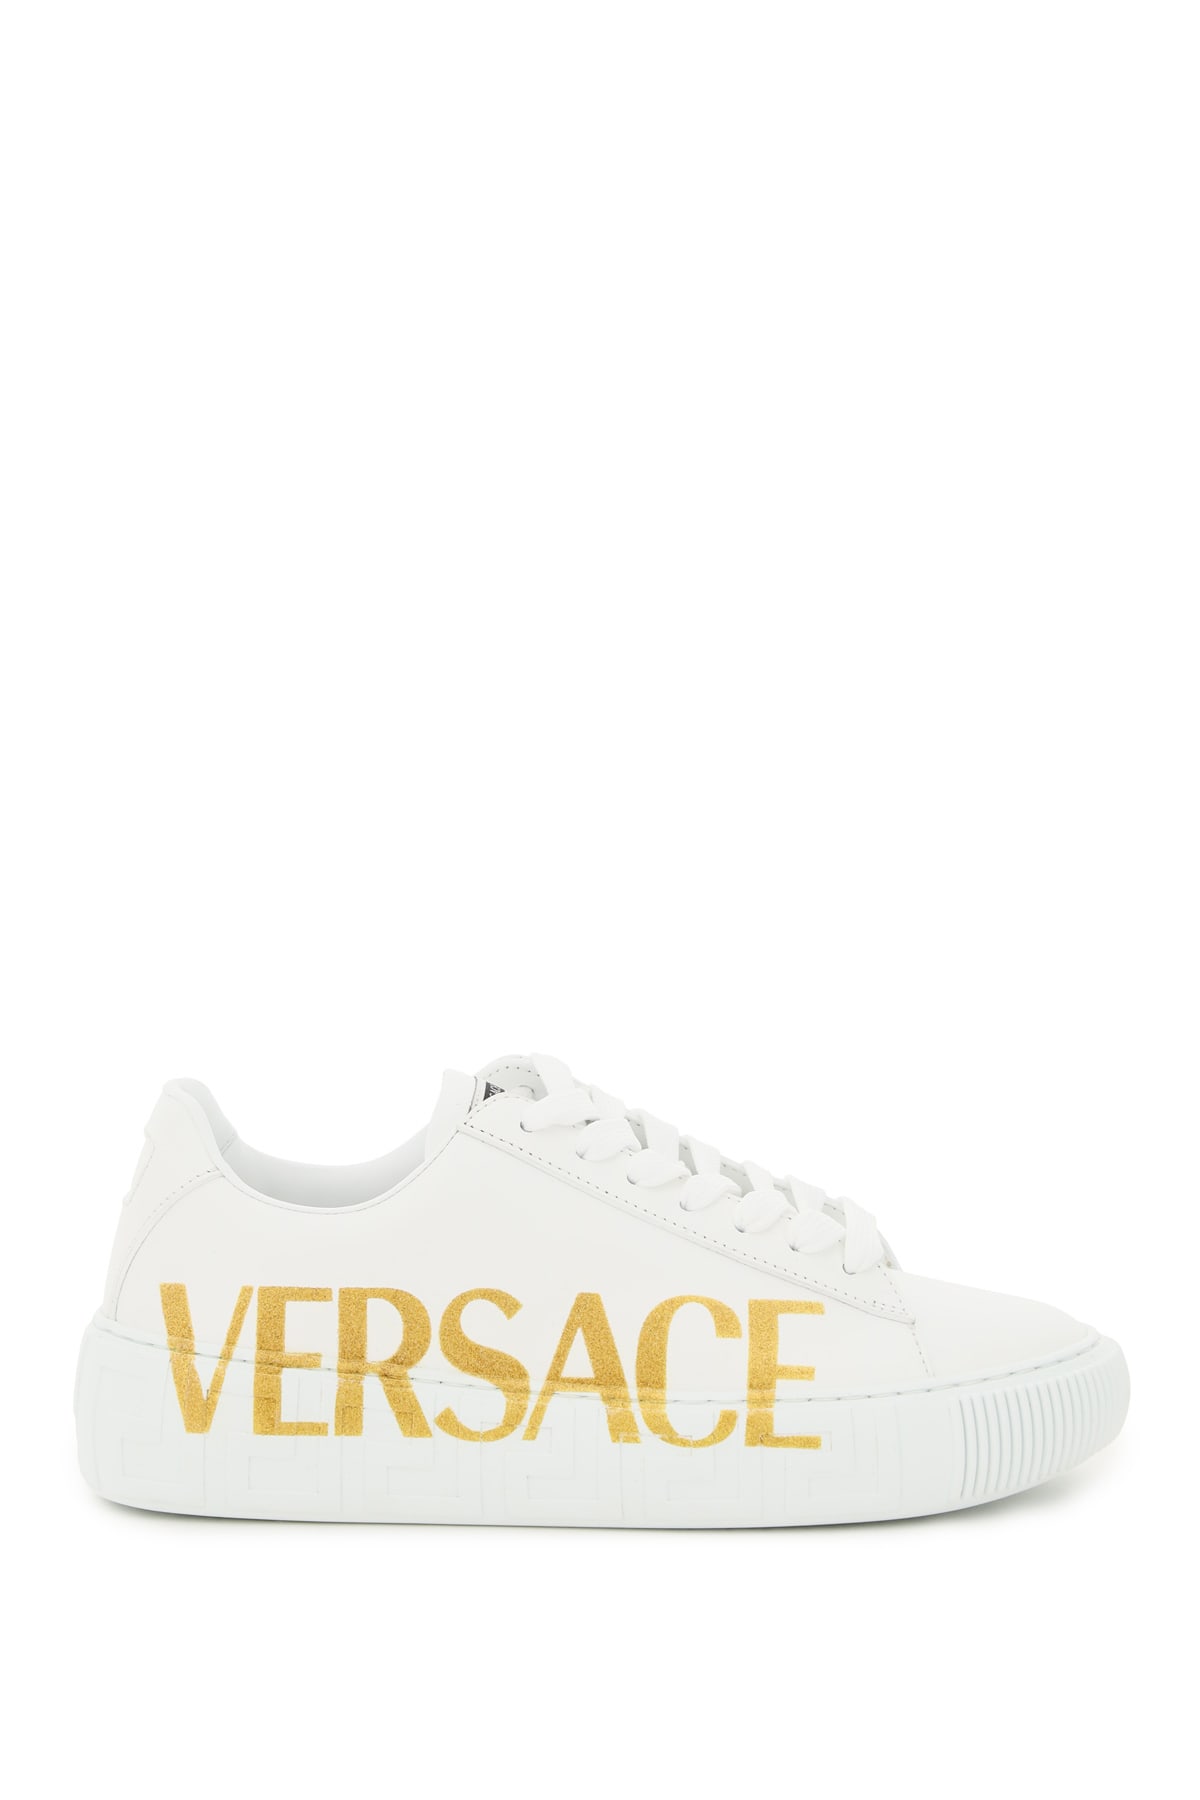 Buy Versace Greca Sneakers online, shop Versace shoes with free shipping